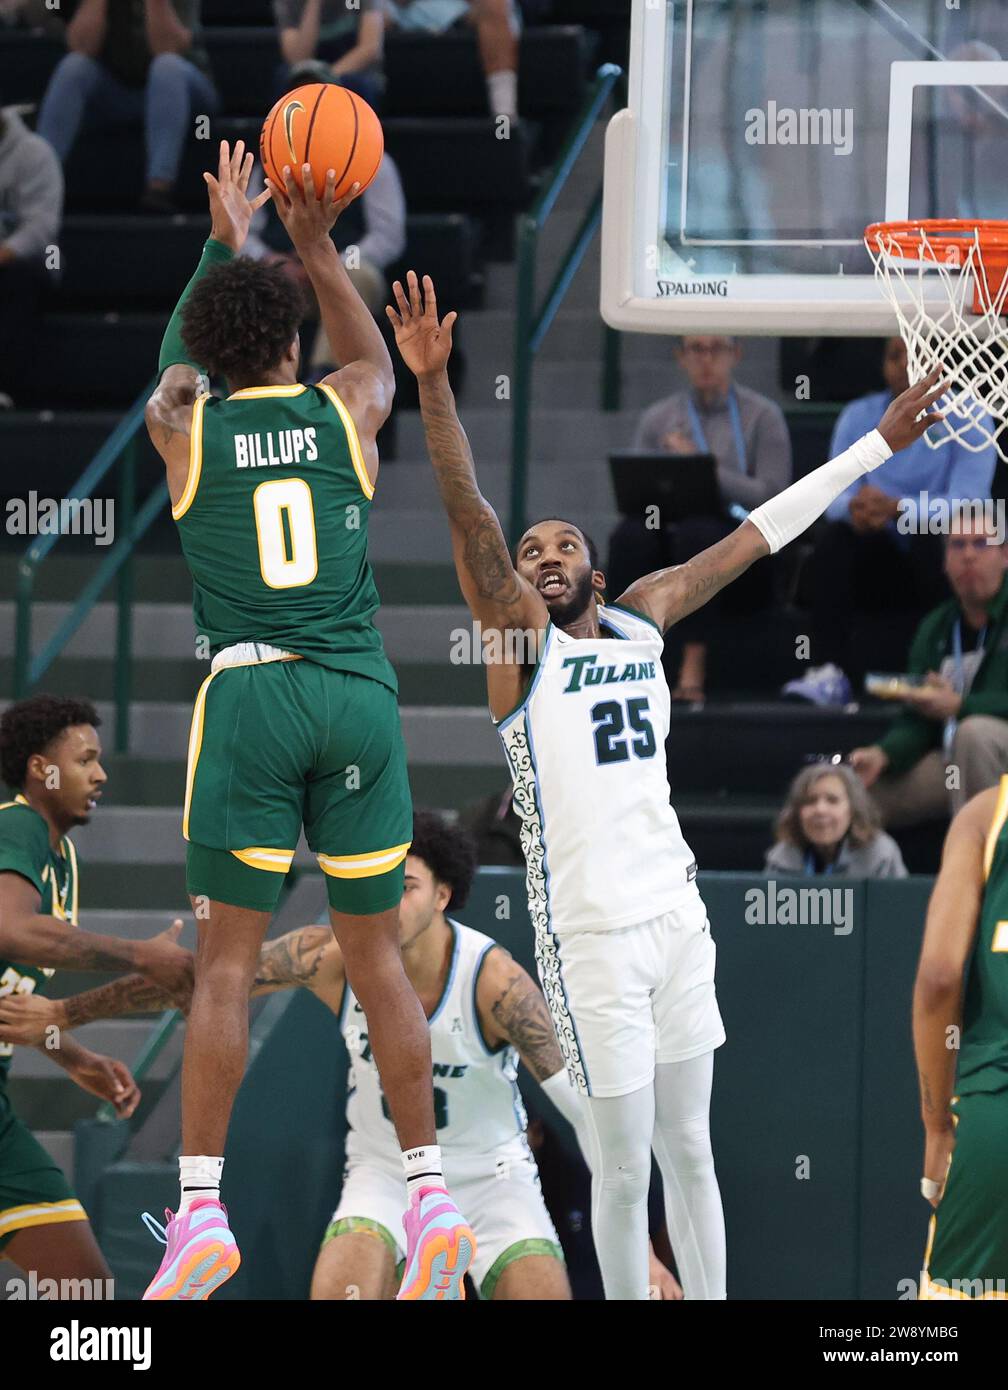 New Orleans, USA. 22nd Dec, 2023. George Mason Patriots guard Jared Billups (0) shoots a three-pointer over Tulane Green Wave guard Jaylen Forbes (25) during a men's basketball game at Fogleman Arena in New Orleans, Louisiana on Friday, December 22, 2023. (Photo by Peter G. Forest/Sipa USA) Credit: Sipa USA/Alamy Live News Stock Photo